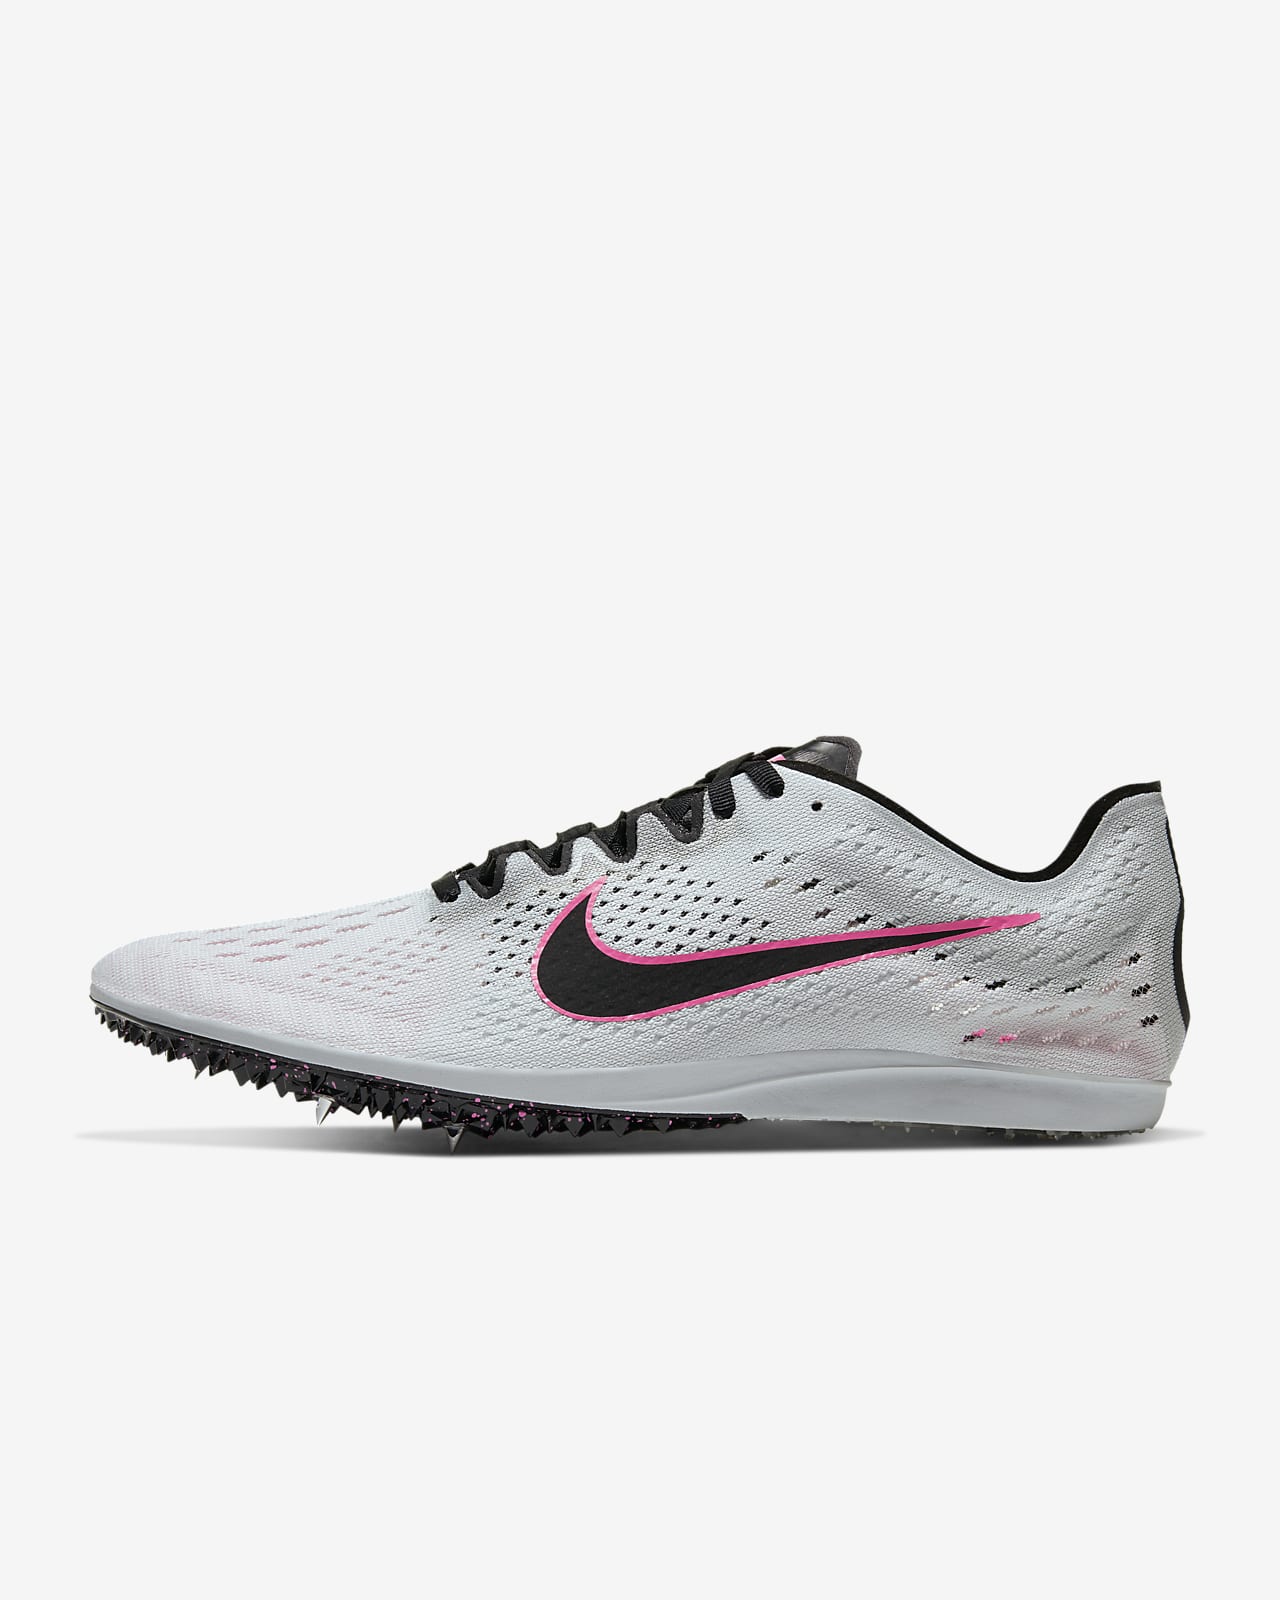 nike track spikes long distance